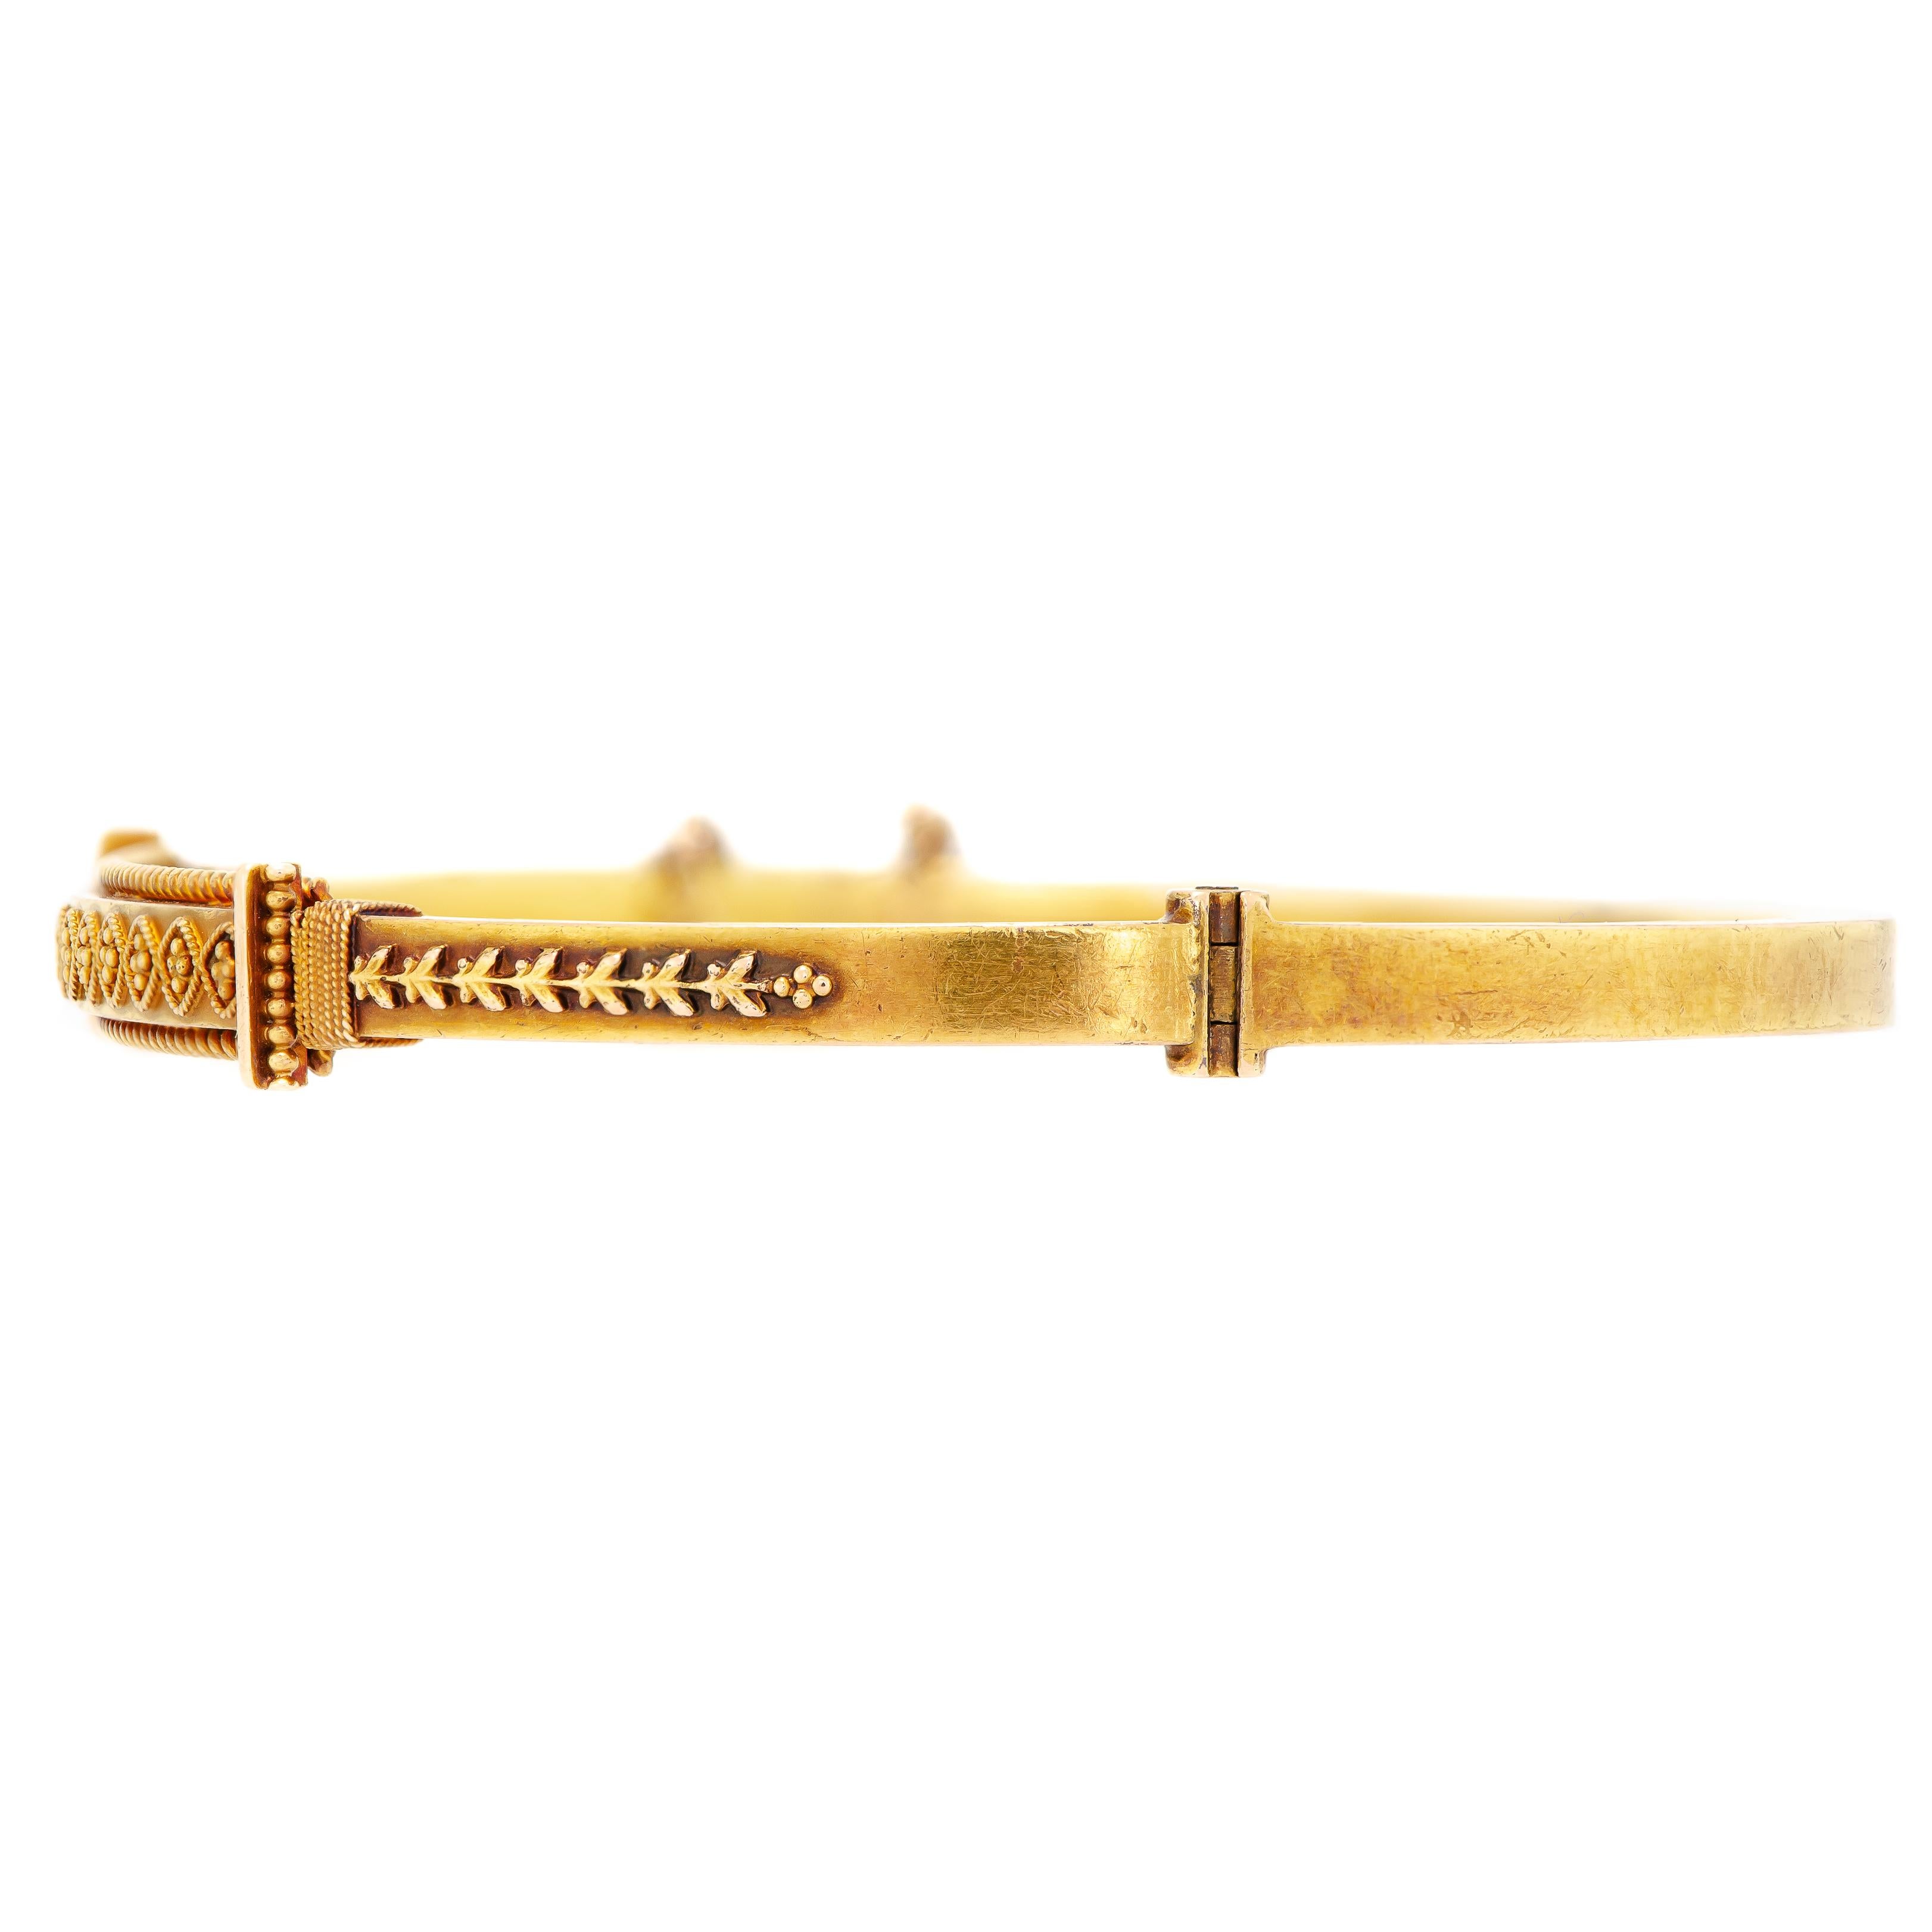 Beautiful gold hinged bangle bracelet from the Victorian Era, circa 1890 slim bracelet constructed of rich 15kt yellow gold with applied Etruscan wire and beadwork, gold safety chain for added security - English - inside circumference of